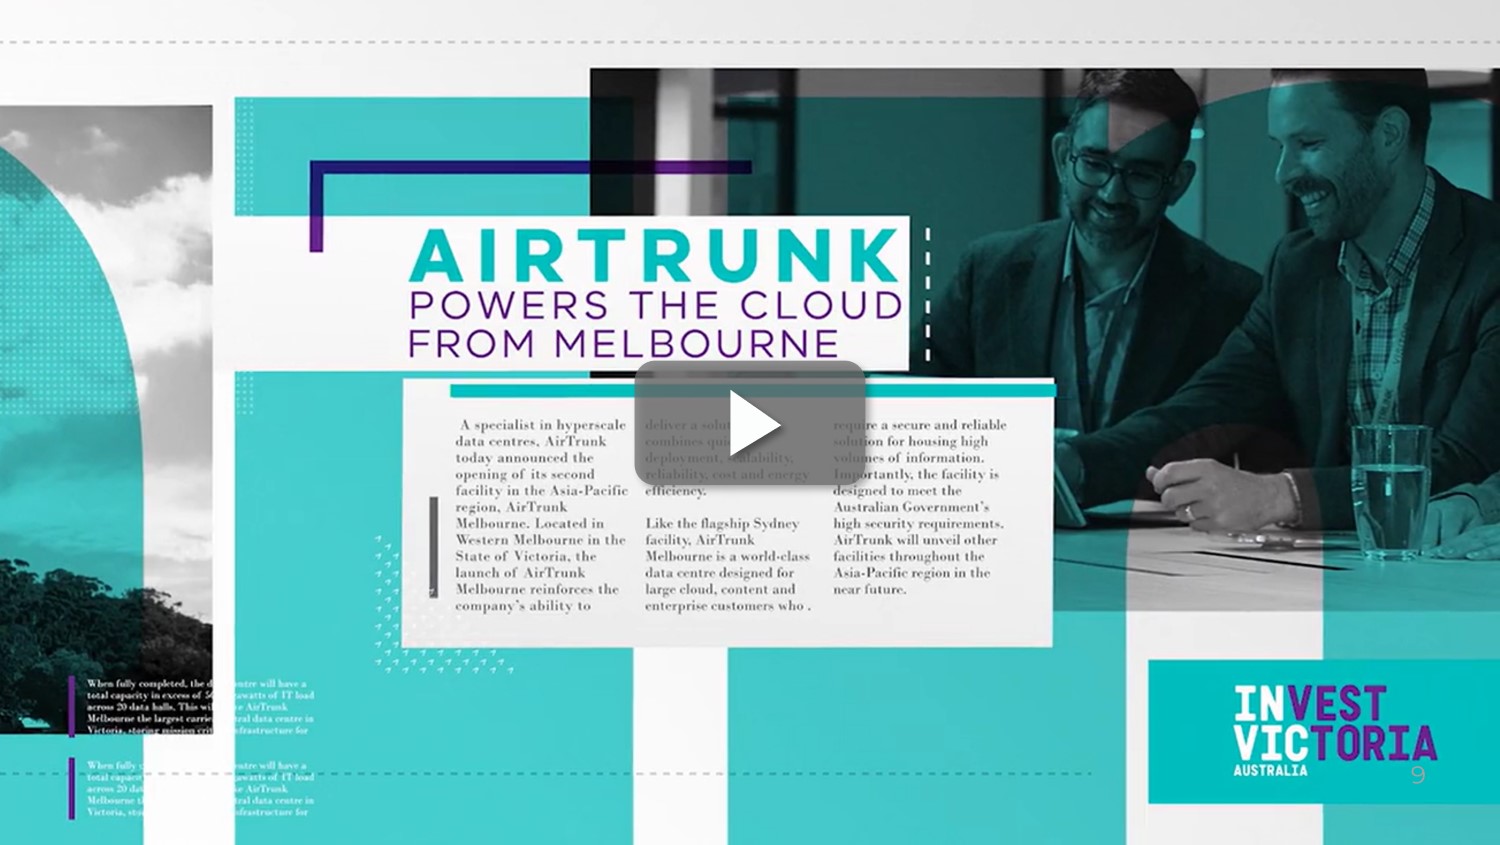 Click to play Airtrunk video